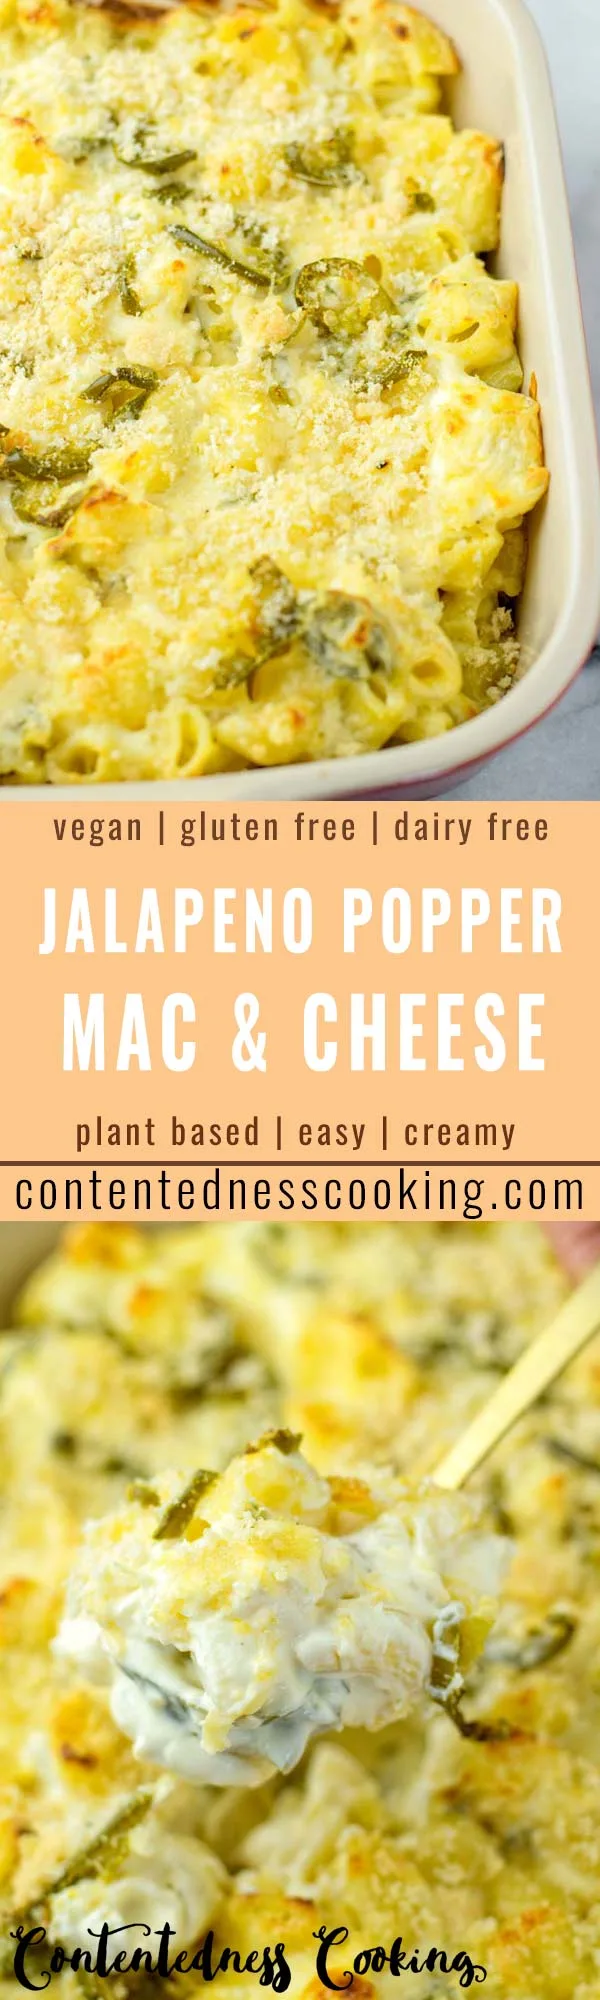 This Jalapeno Popper Mac and Cheese is the ultimate comfort food and super easy to make in under 30 minutes! The whole family will love the favorite in no time, such a keeper for dinner, lunch, meal prep and so much more. No one would ever taste it is vegan. So rich, cheesy and creamy taste like the real deal if not better. 